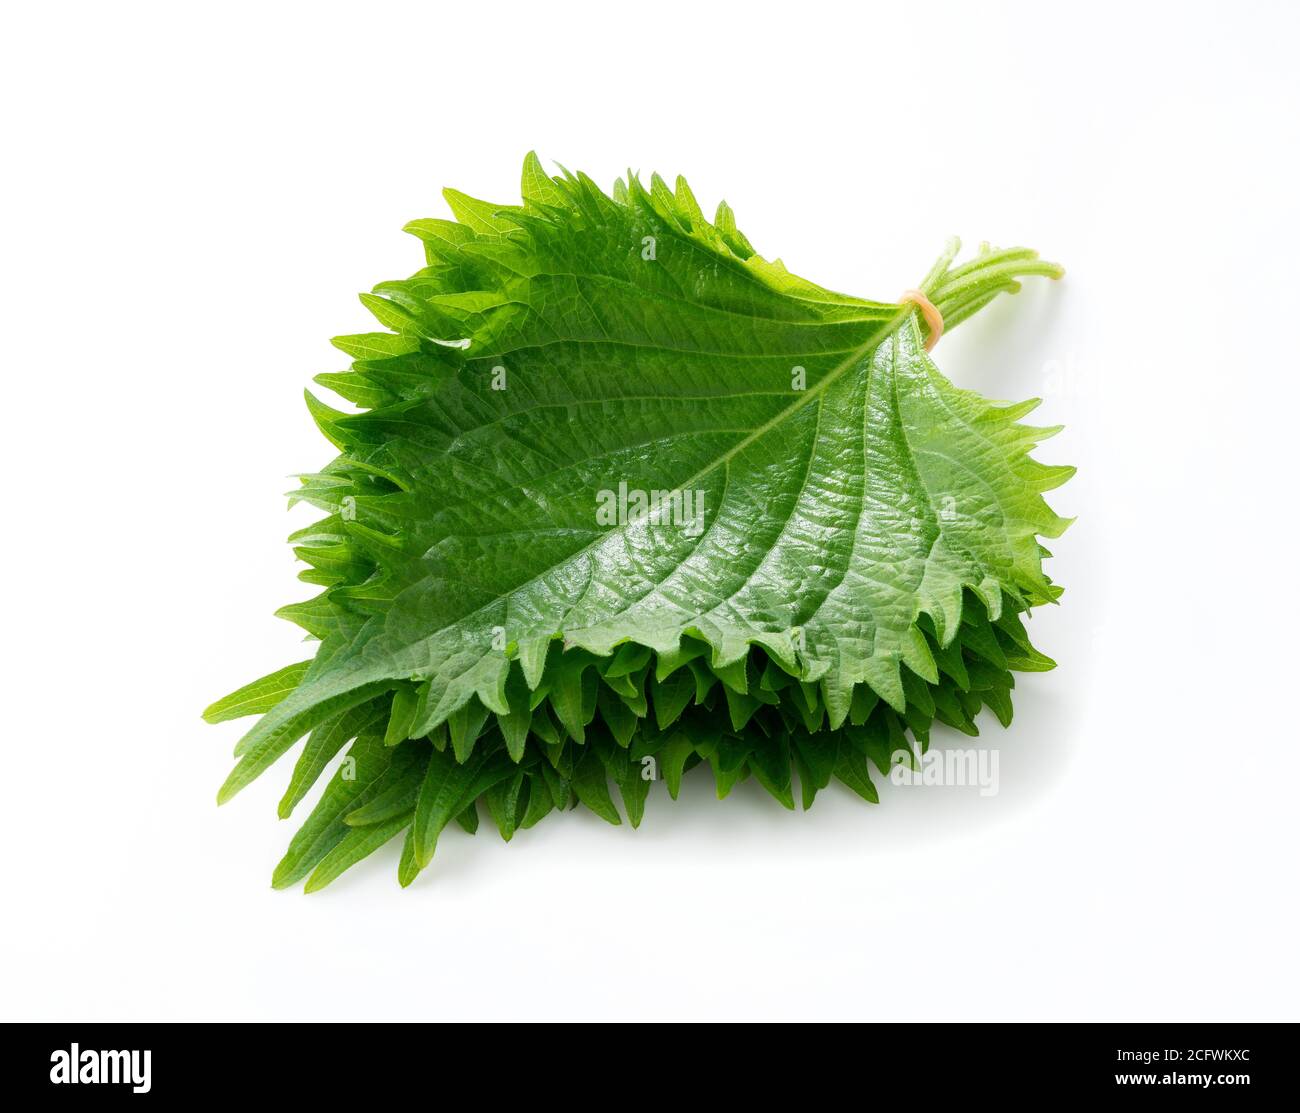 The green perilla placed on a white background was photographed from an angle Stock Photo